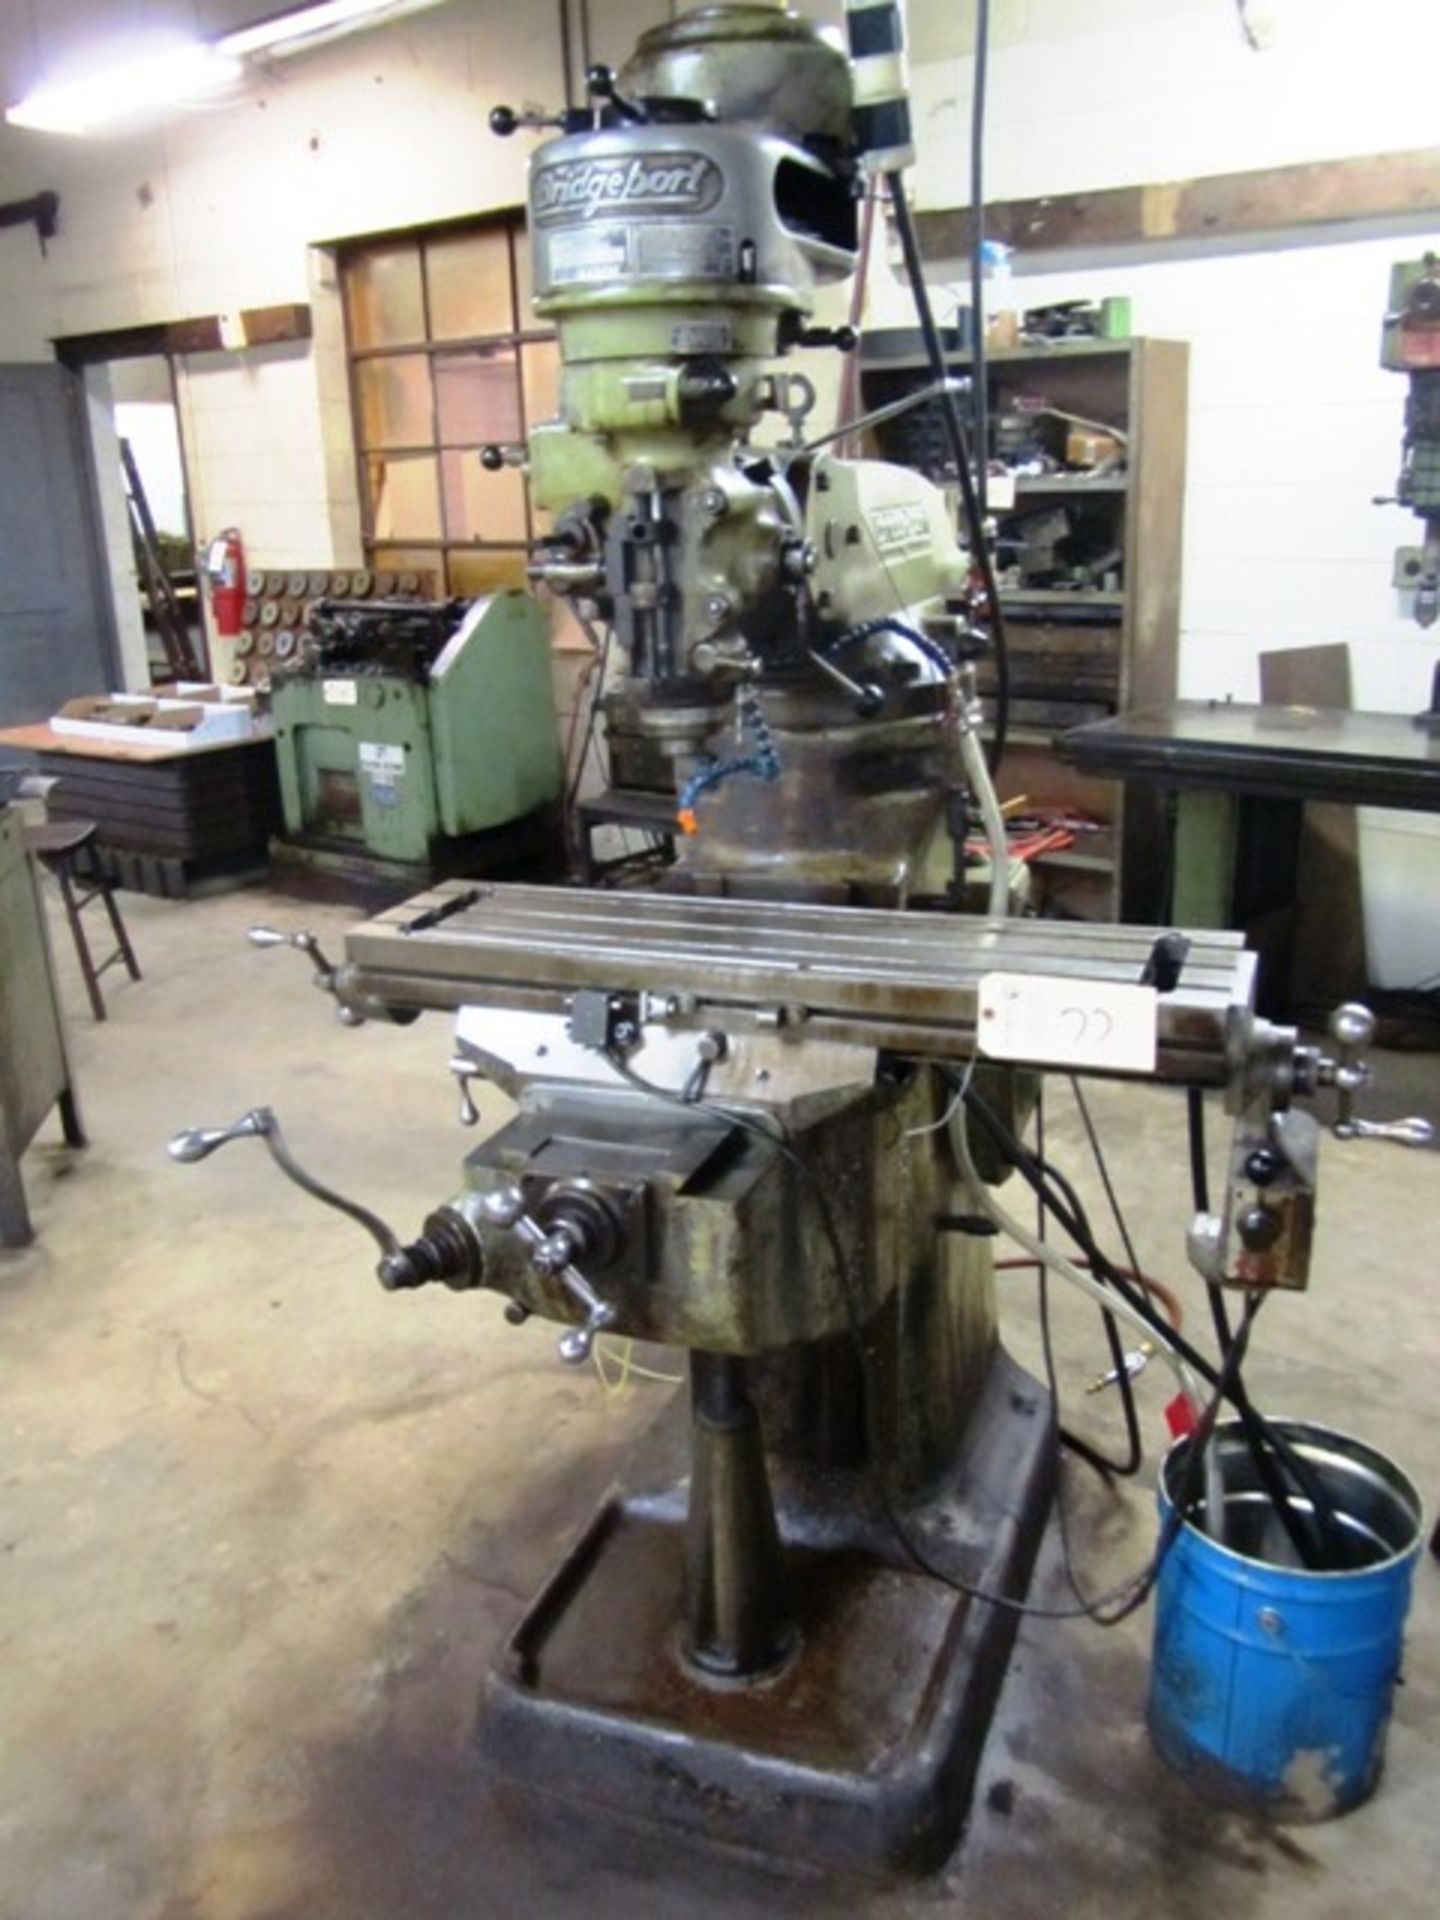 Bridgeport 1 HP Vertical Milling Machine with 9'' x 36'' Power Feed Table, Spindle Speeds to 2,720